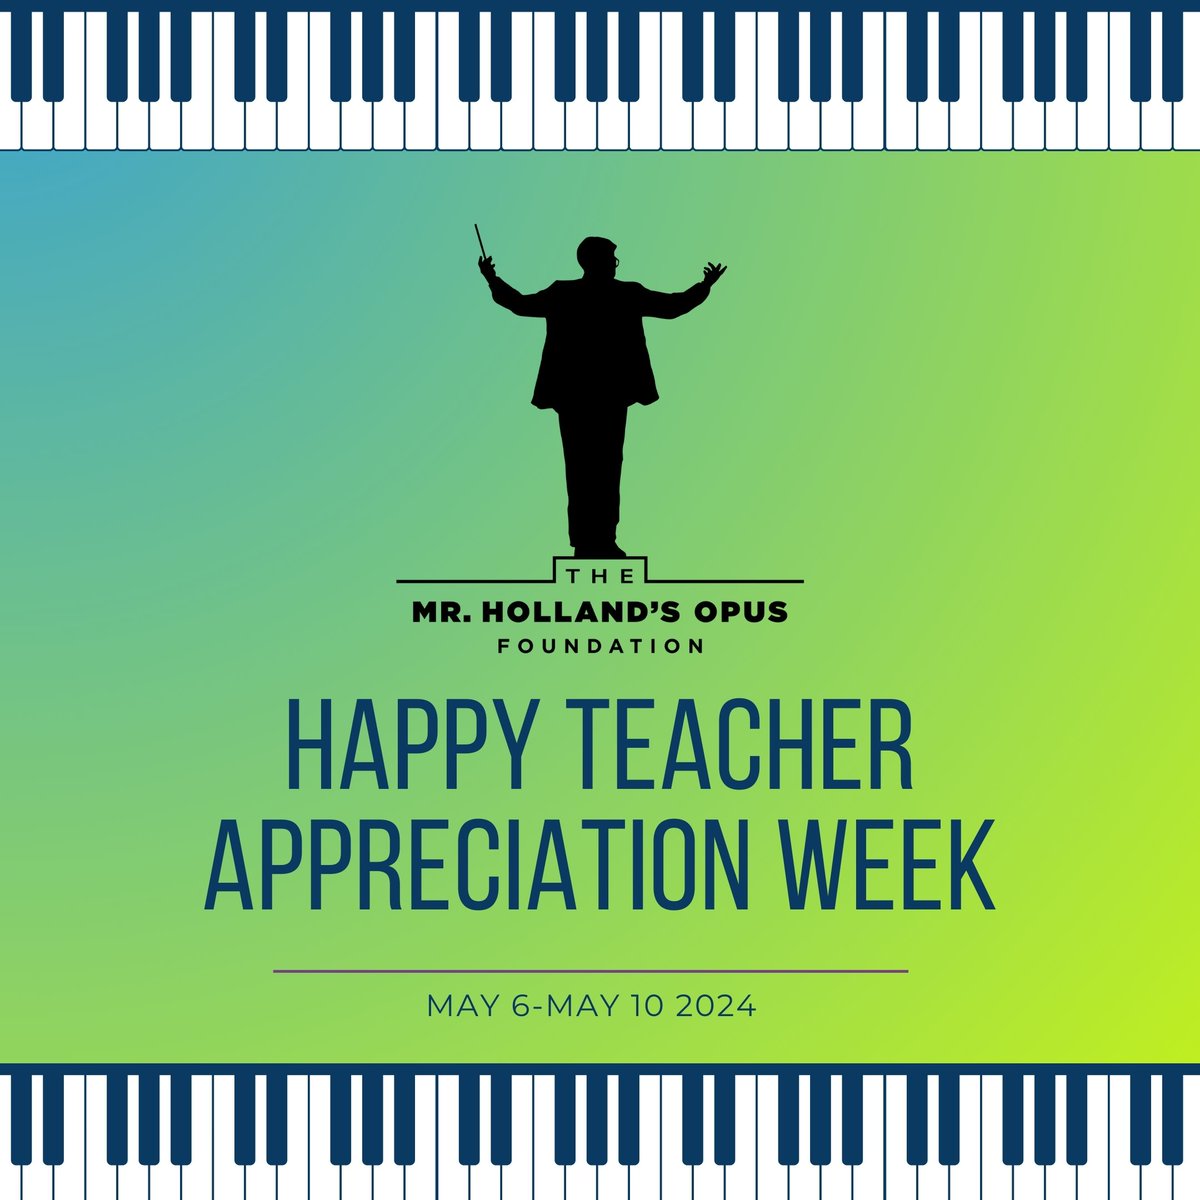 May 6th-10th is #teacherappreciationweek and we're going to give special shoutouts all week long to our favorites: music teachers! Be on the lookout for our posts all week long to help us celebrate these wonderful educators. 🎵 #mhof #mhopus #musicteachers #musiceducation